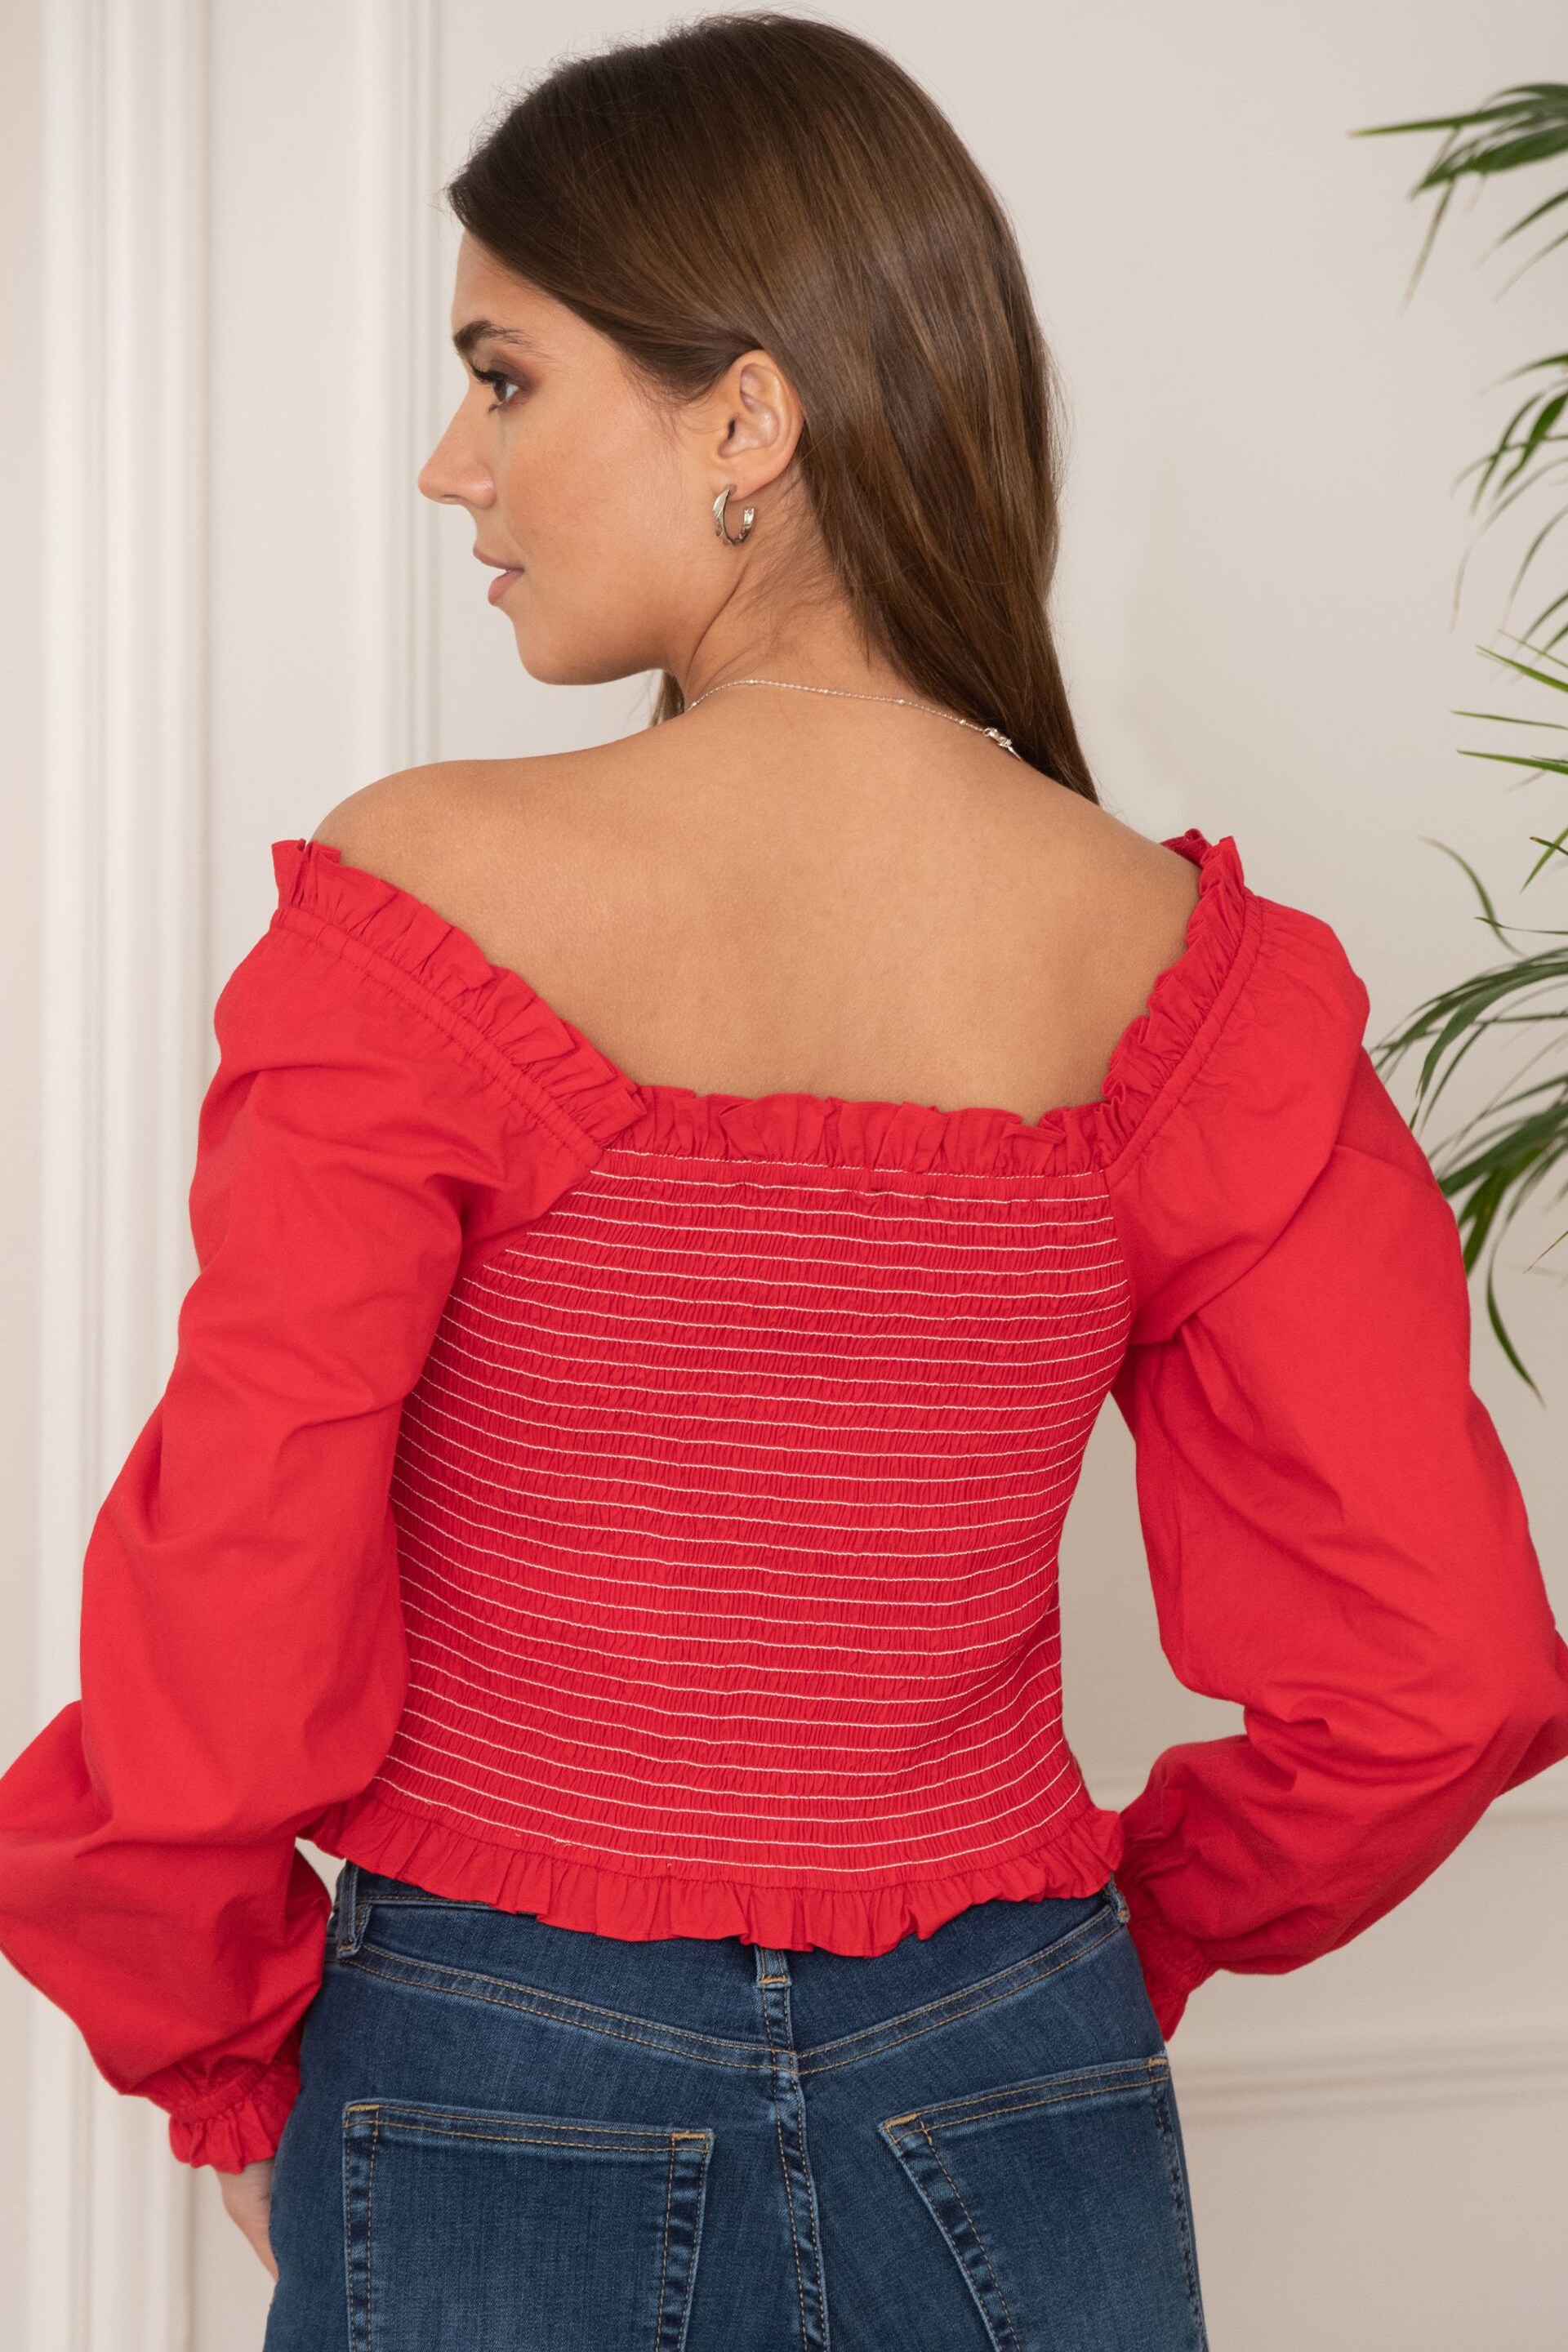 Pour Moi Red Rachel Cotton Shirred Bodice Long Sleeve Top - Image 3 of 5